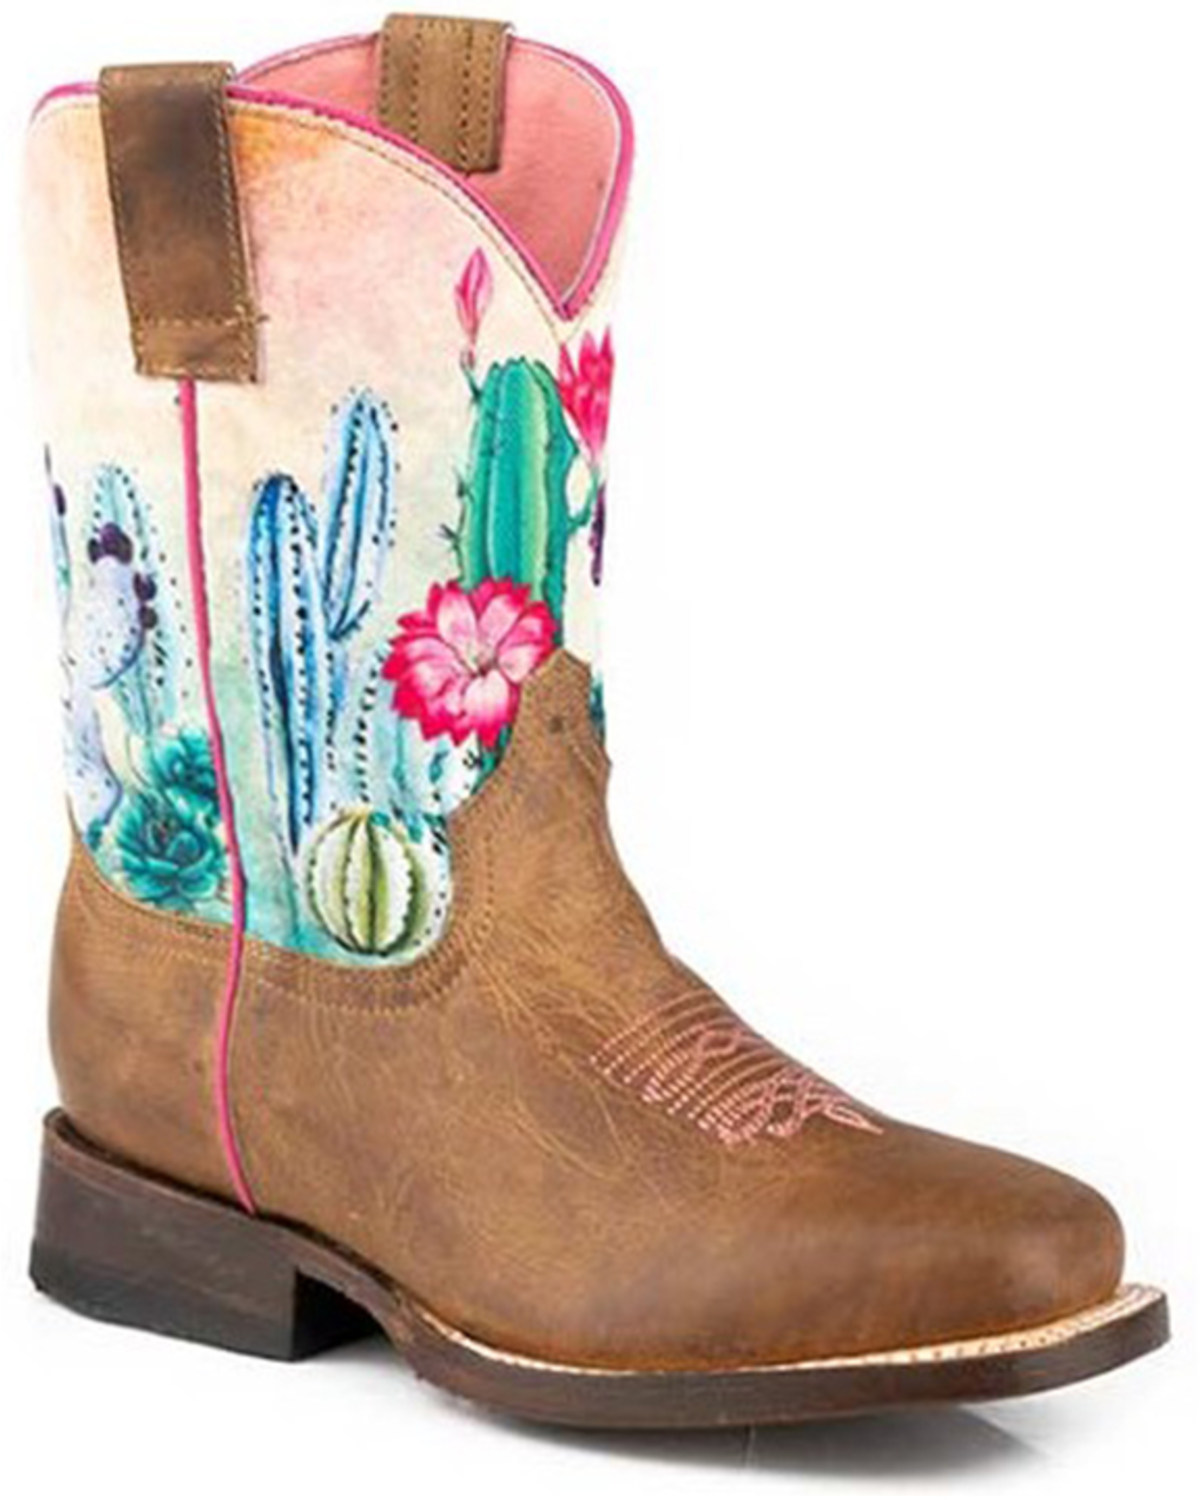 Roper Girls' Cacti Western Boots - Square Toe